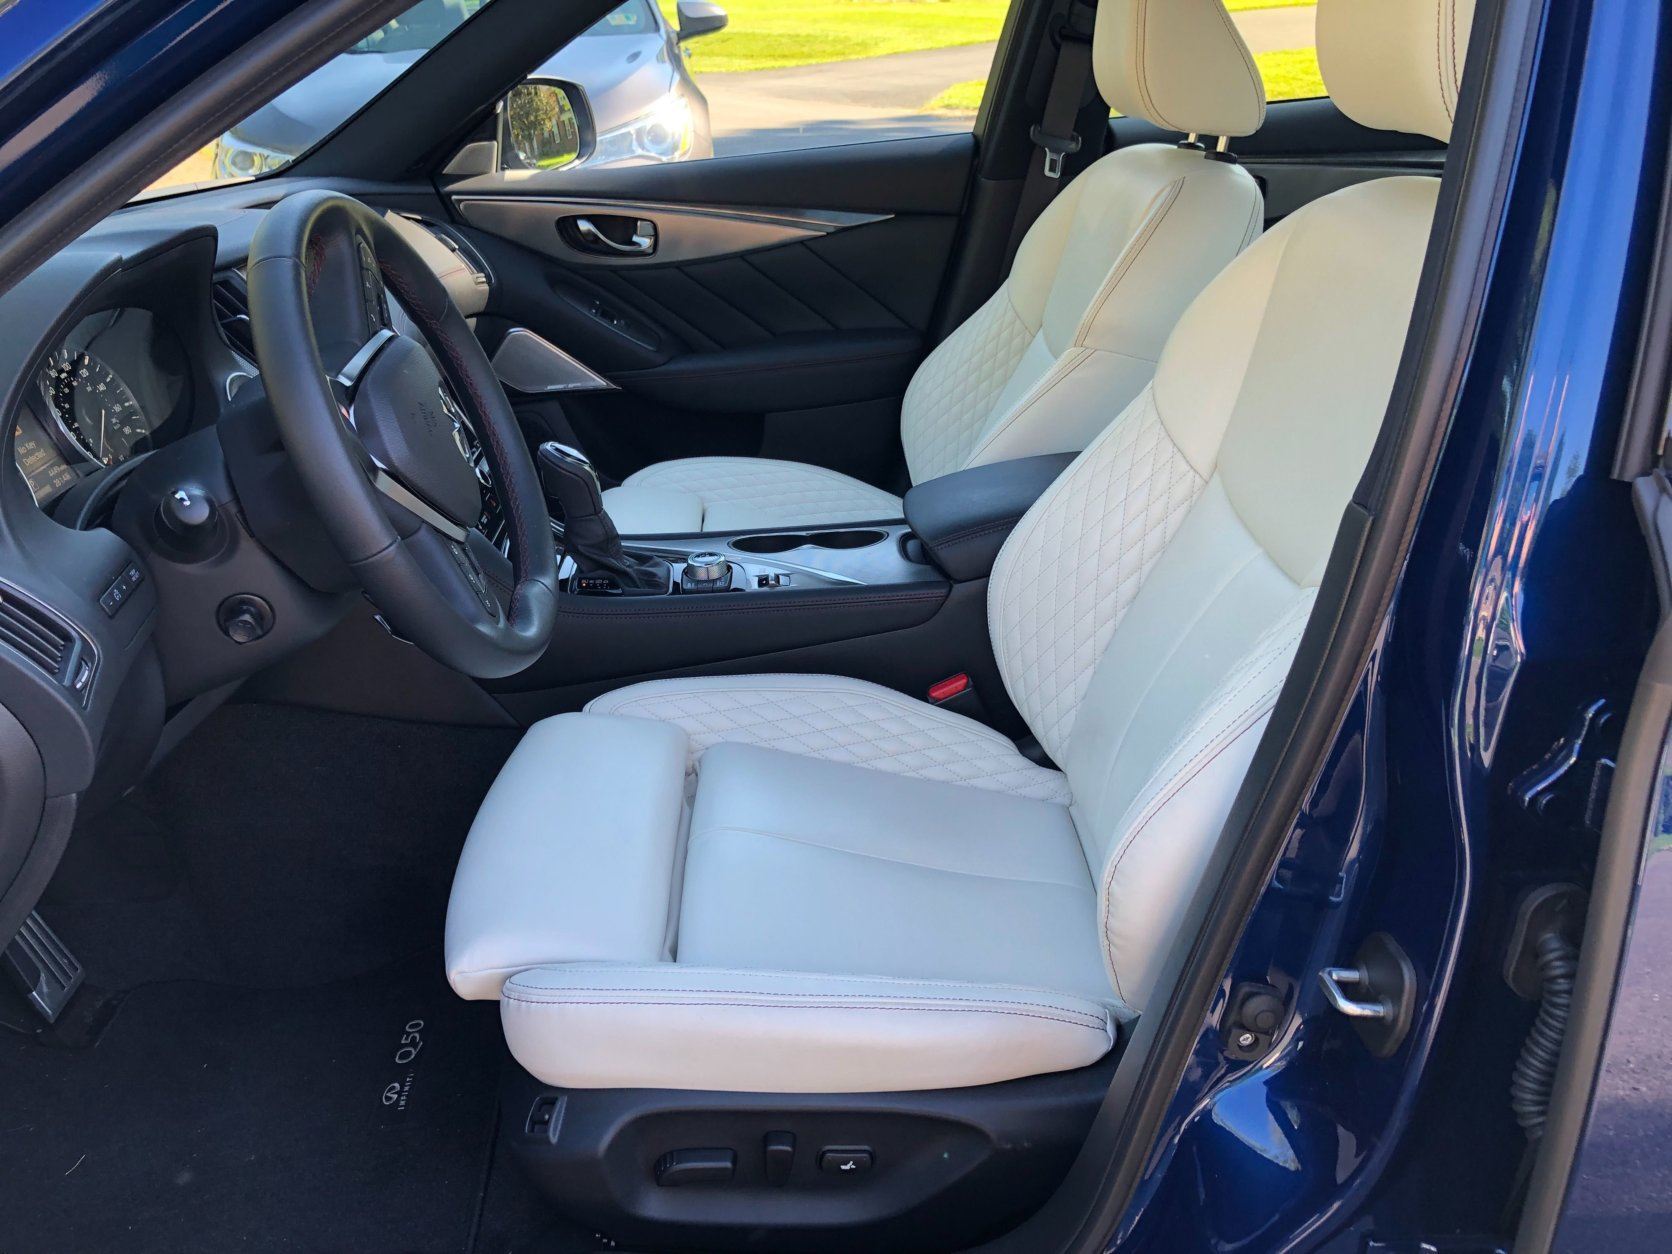 <p>The inside of the Infiniti Q50 appears a bit plain when compared to some other luxury sedans. With high quality, quilted Semi-aniline leather and red interior stitching, it still makes for a comfortable ride. The aluminum trim is also a very nice touch.</p>
